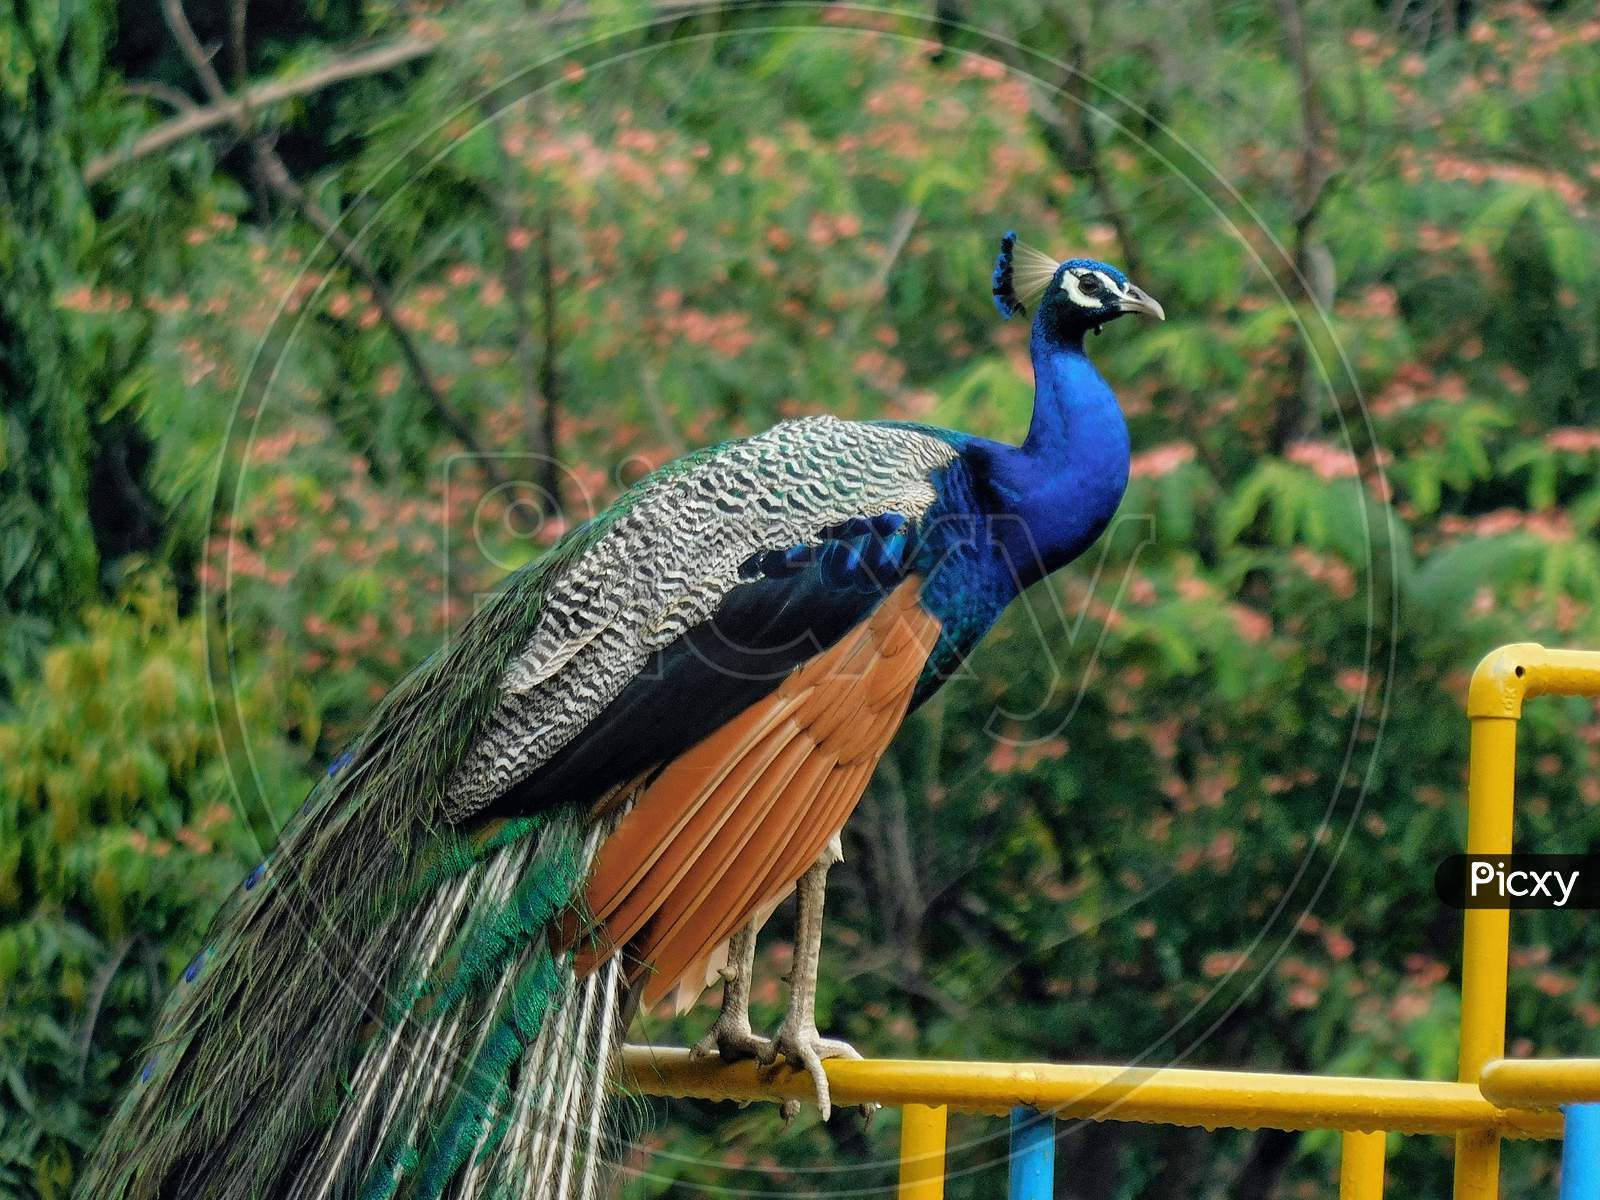 Blue peacock with feathers